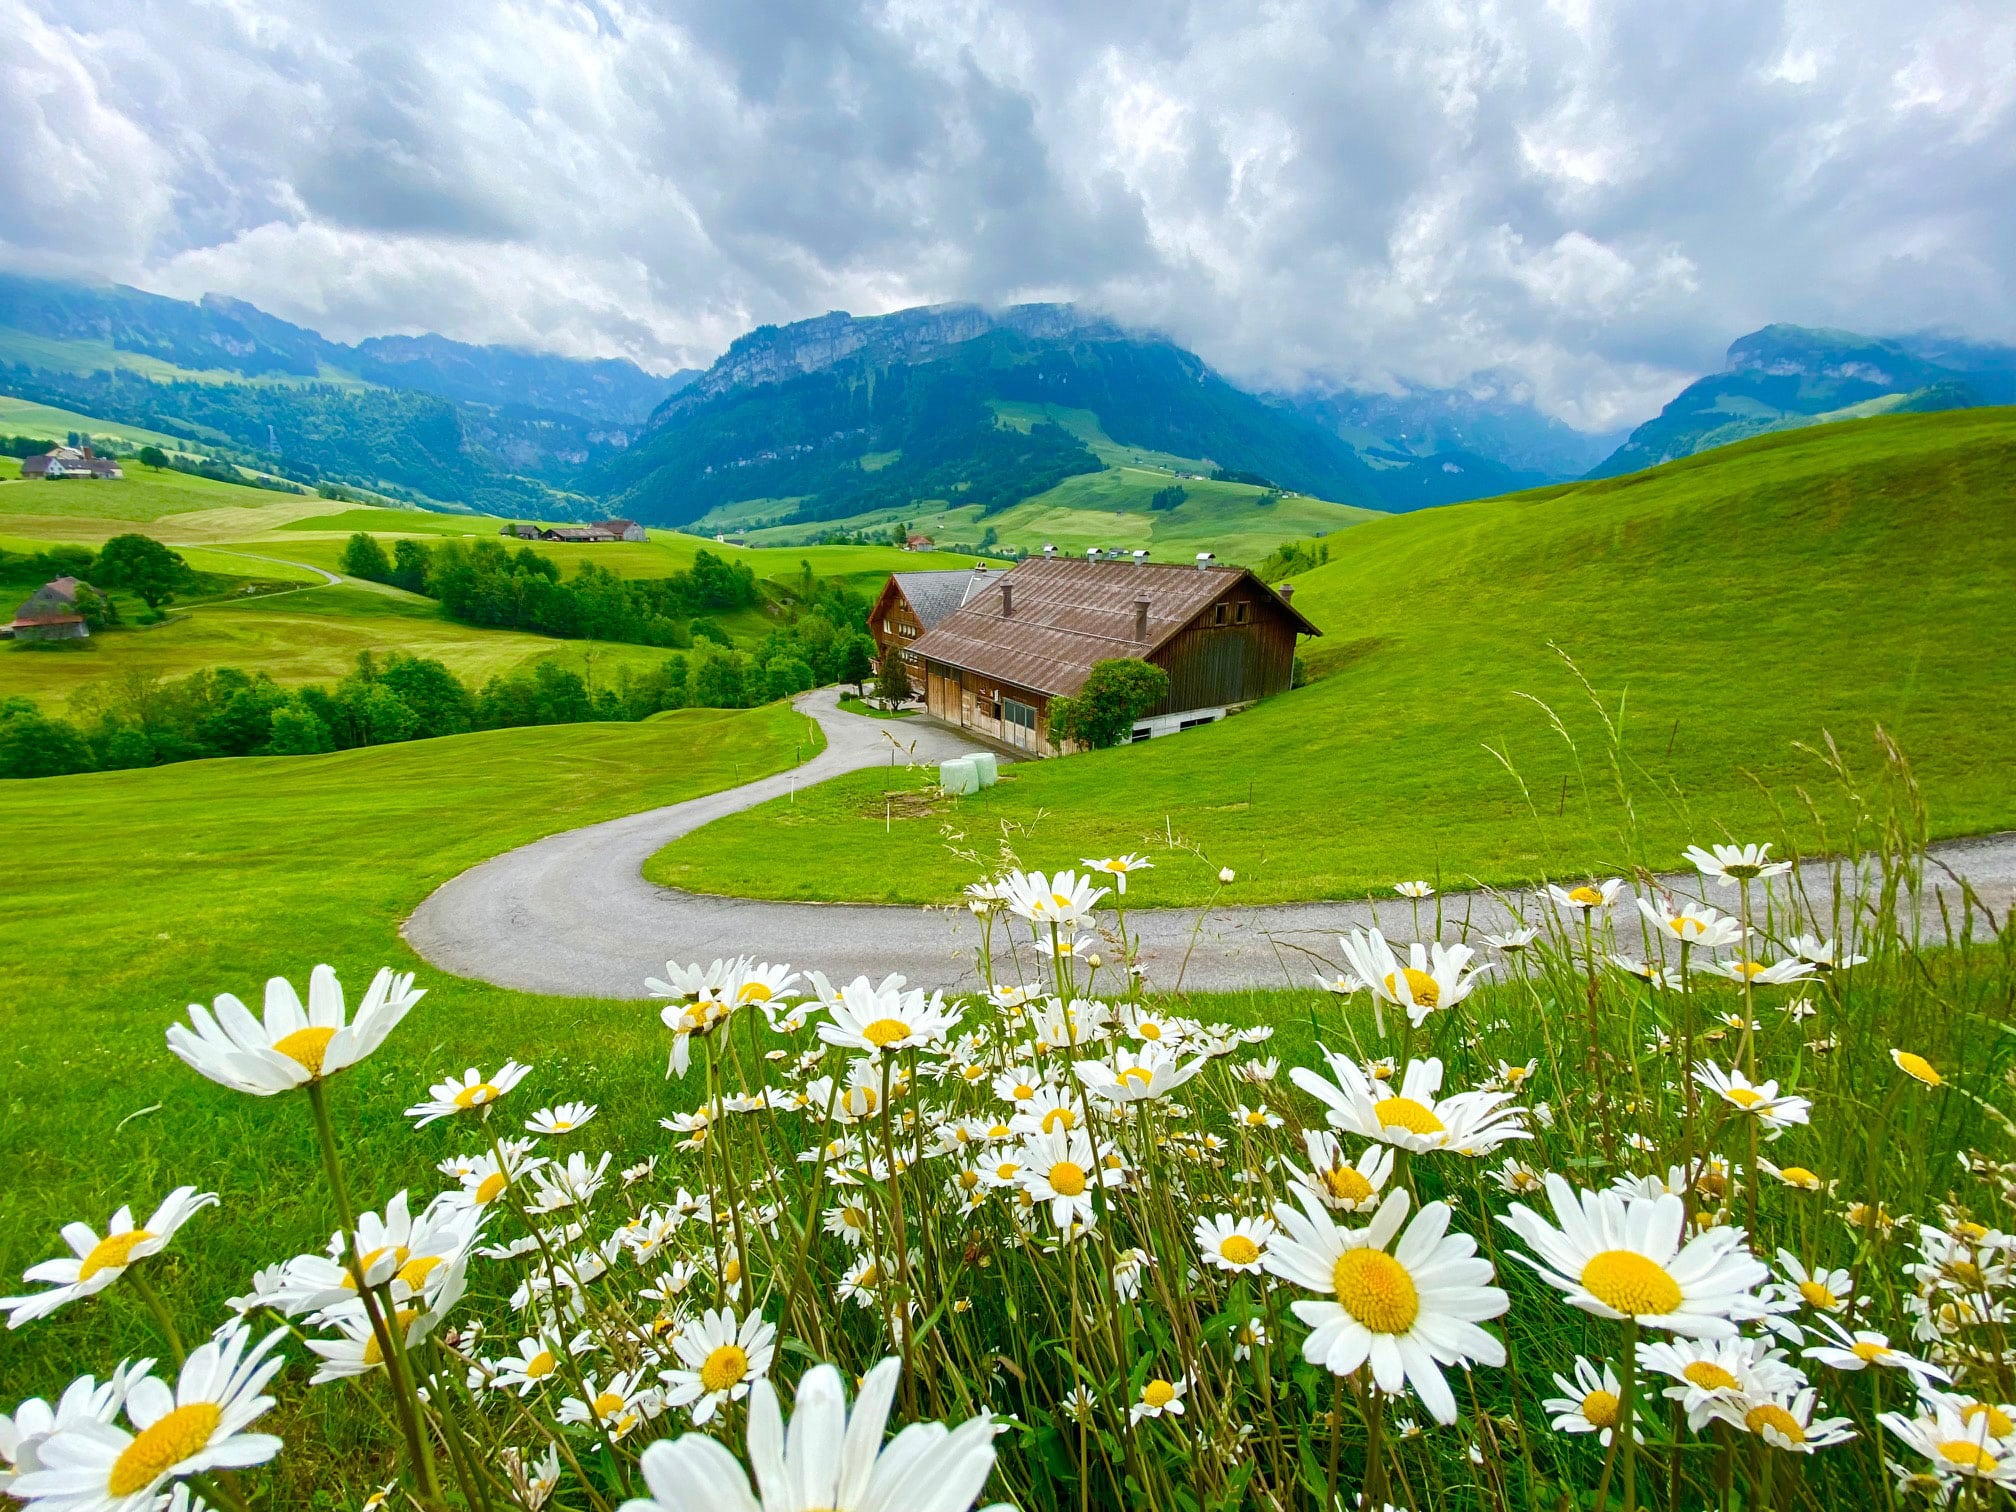 Swiss Farm Experience, Appenzell & Rhine Falls Day Tour (from Basel)